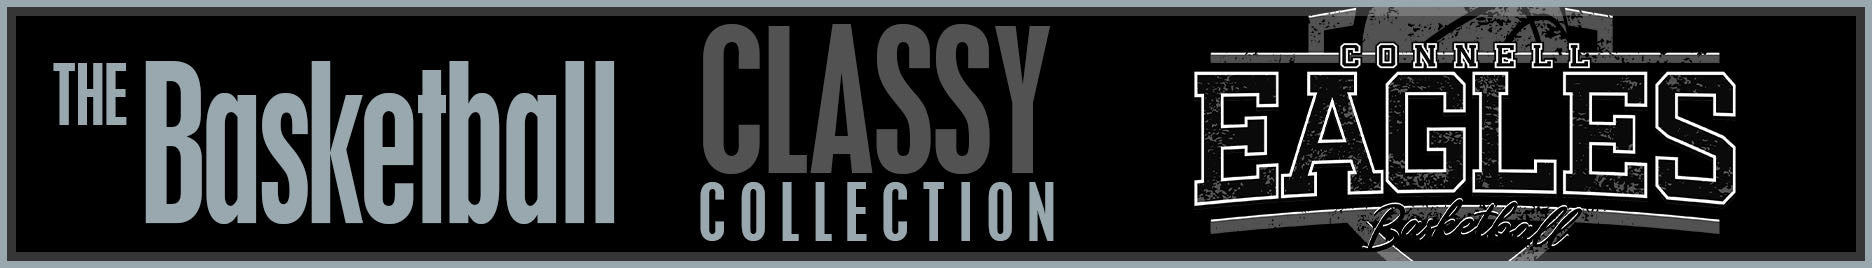 Basketball Classy Collection